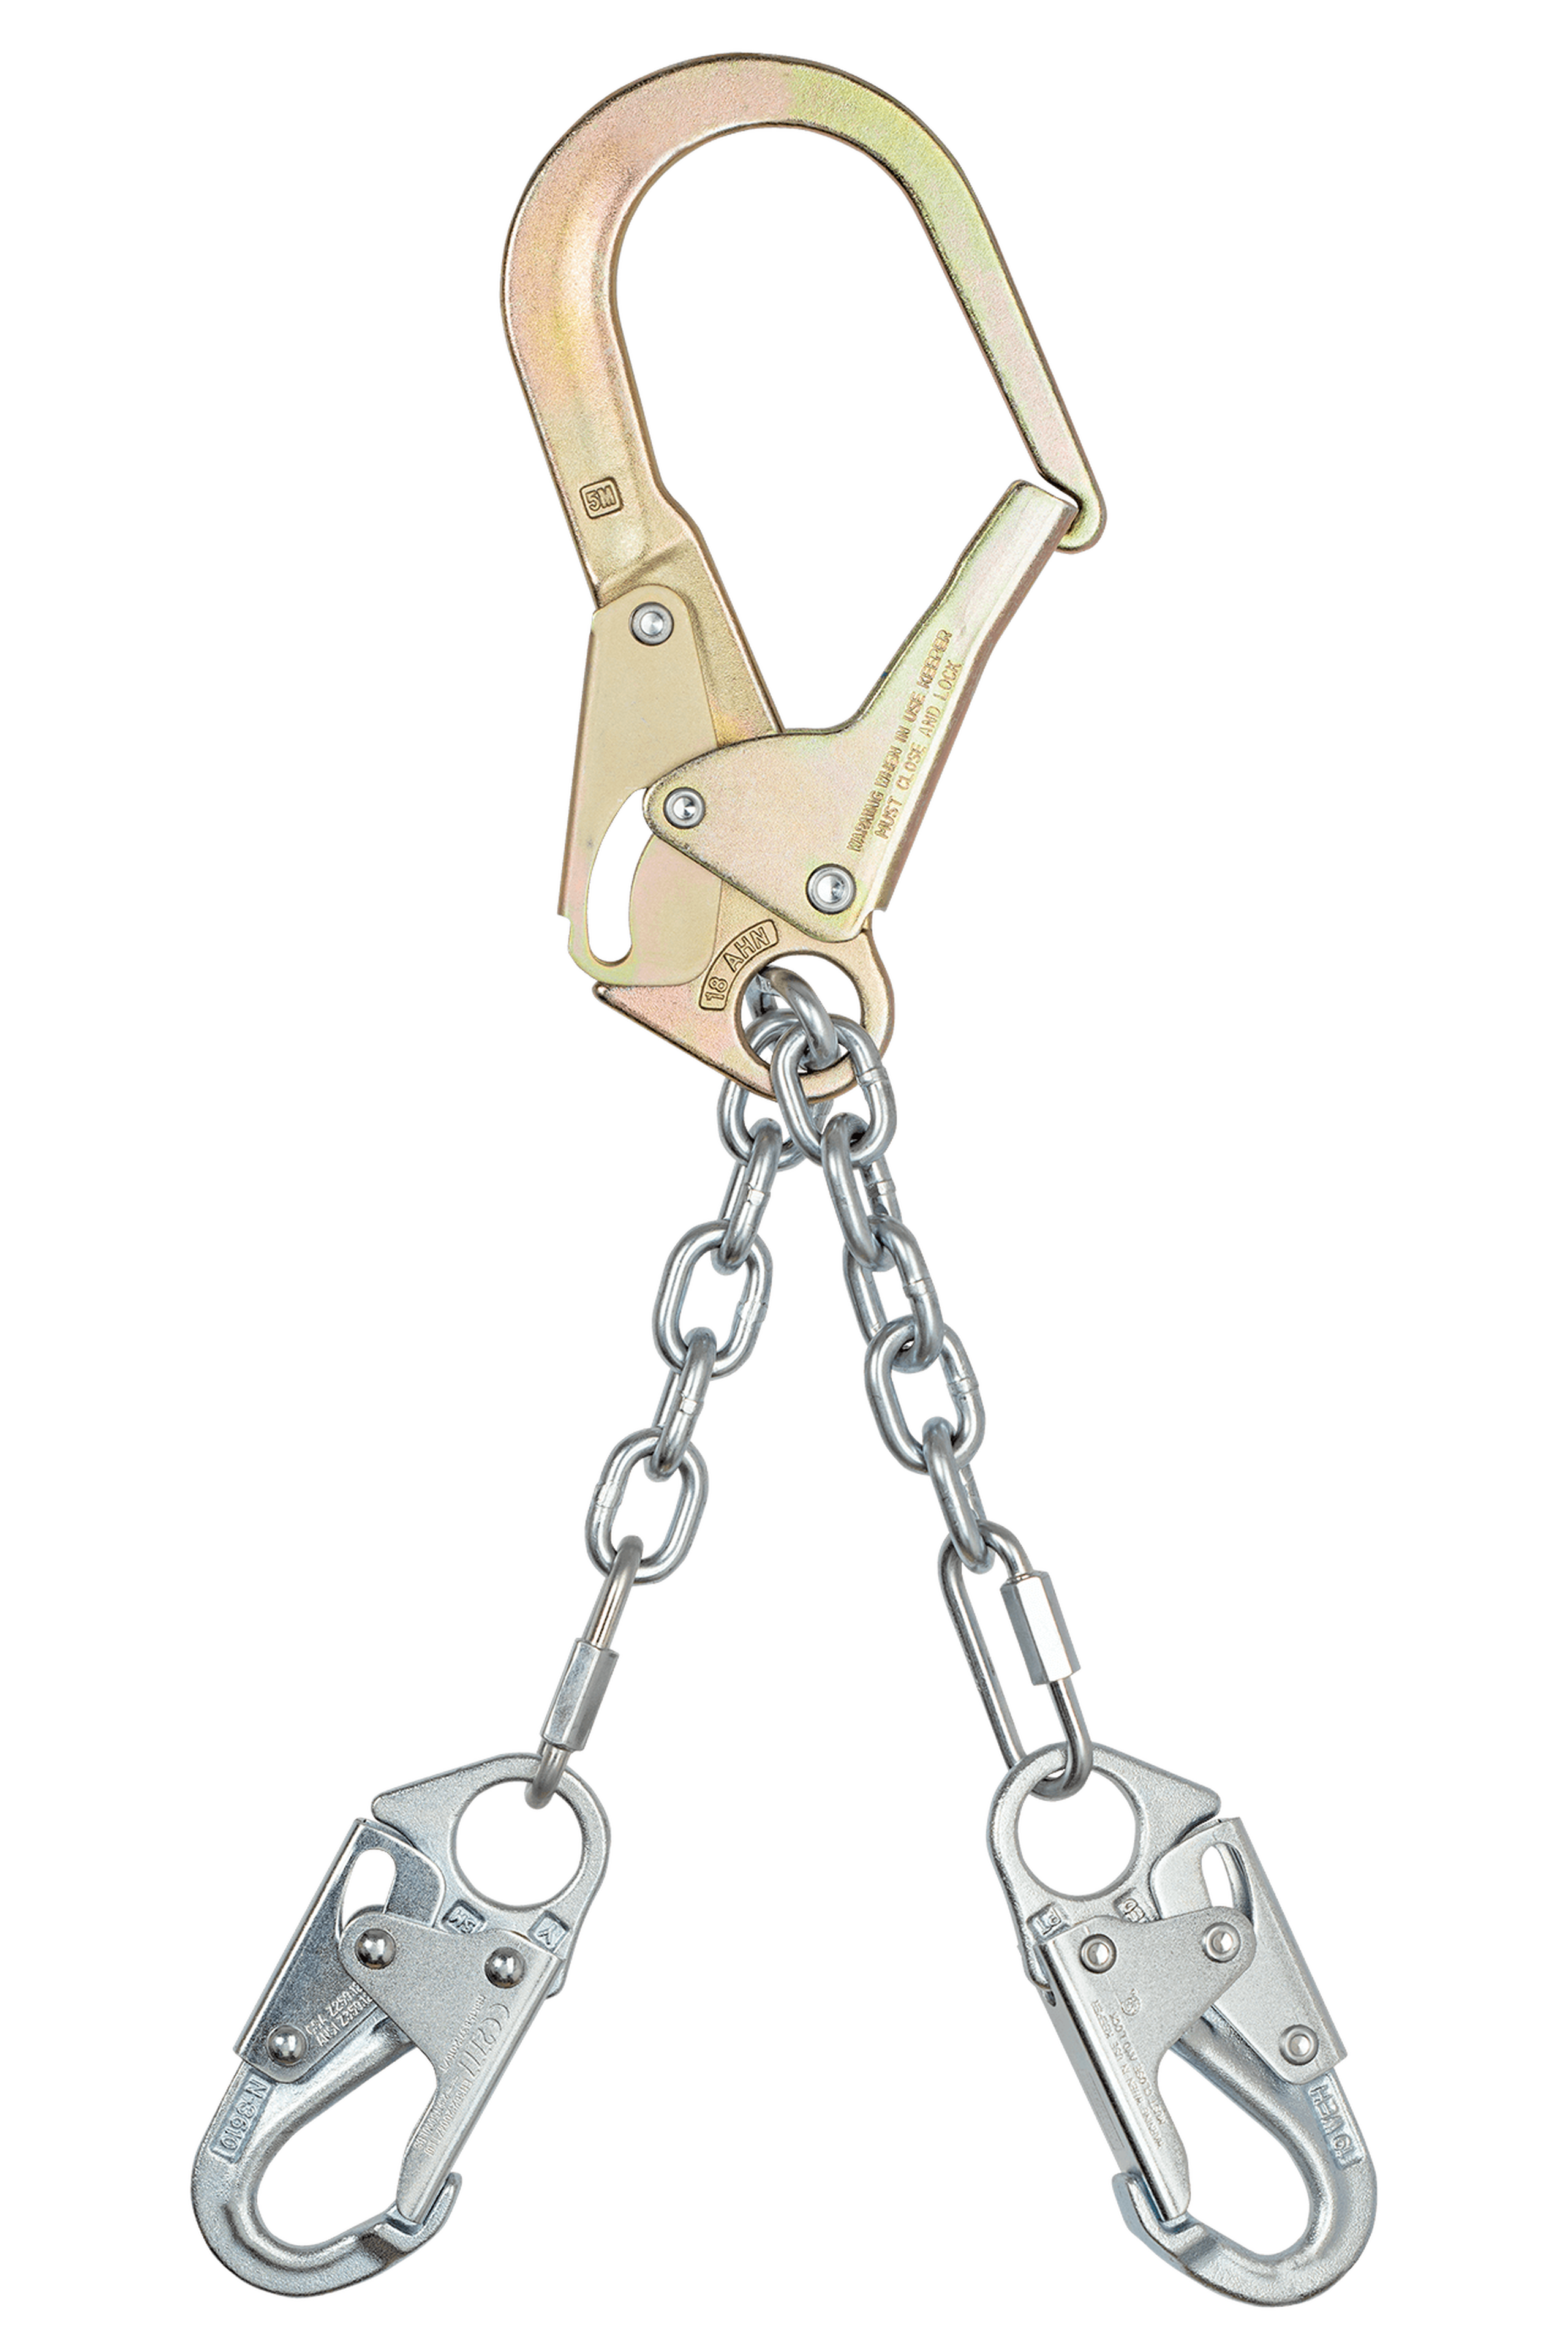 FallTech 8252LT 21" Premium Rebar Positioning Assembly with GR 43 Chain with Non-Swivel Rebar Hook (each)